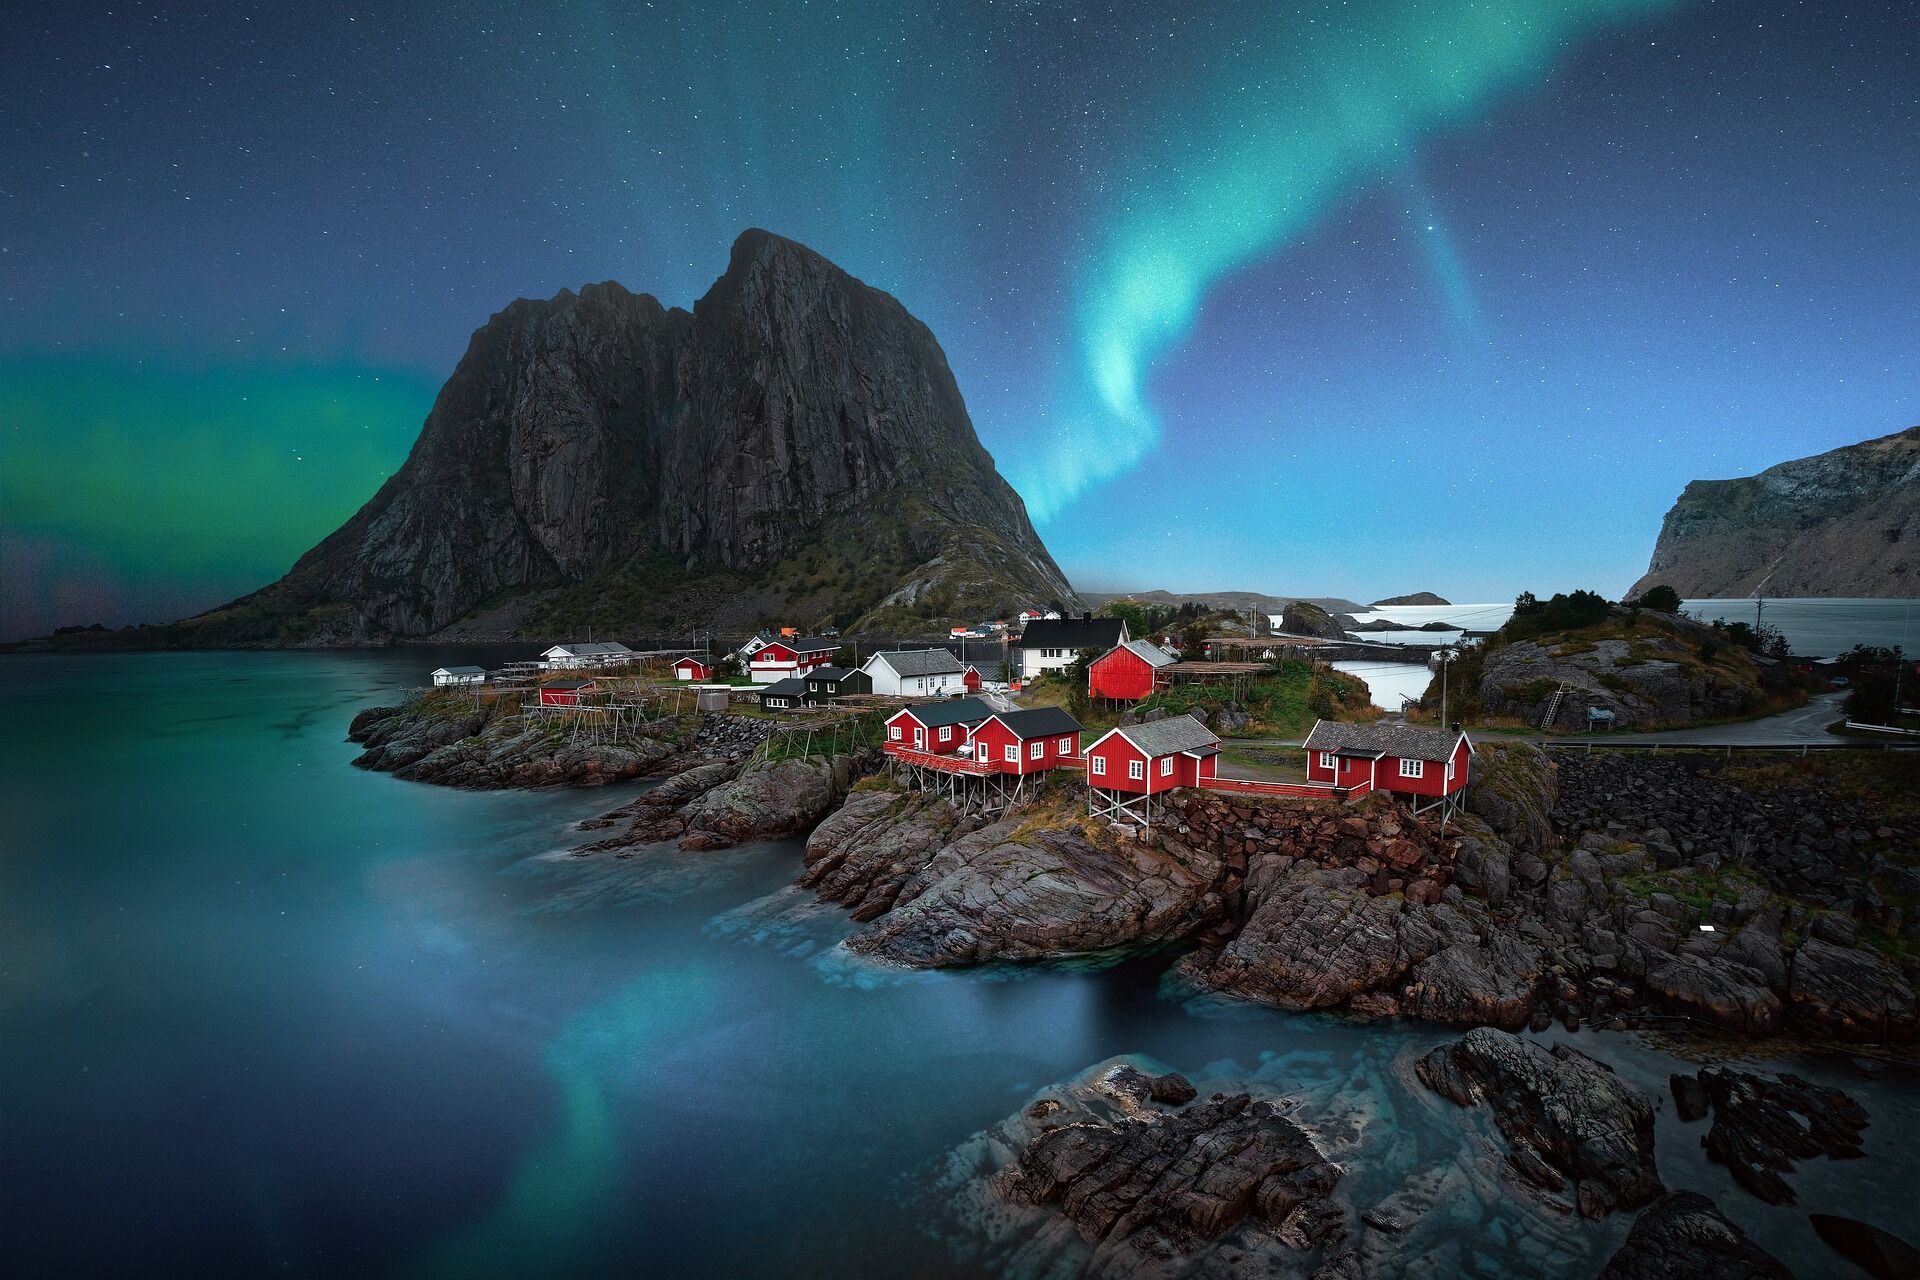 From North America to Asia: 12 best places to see the northern lights